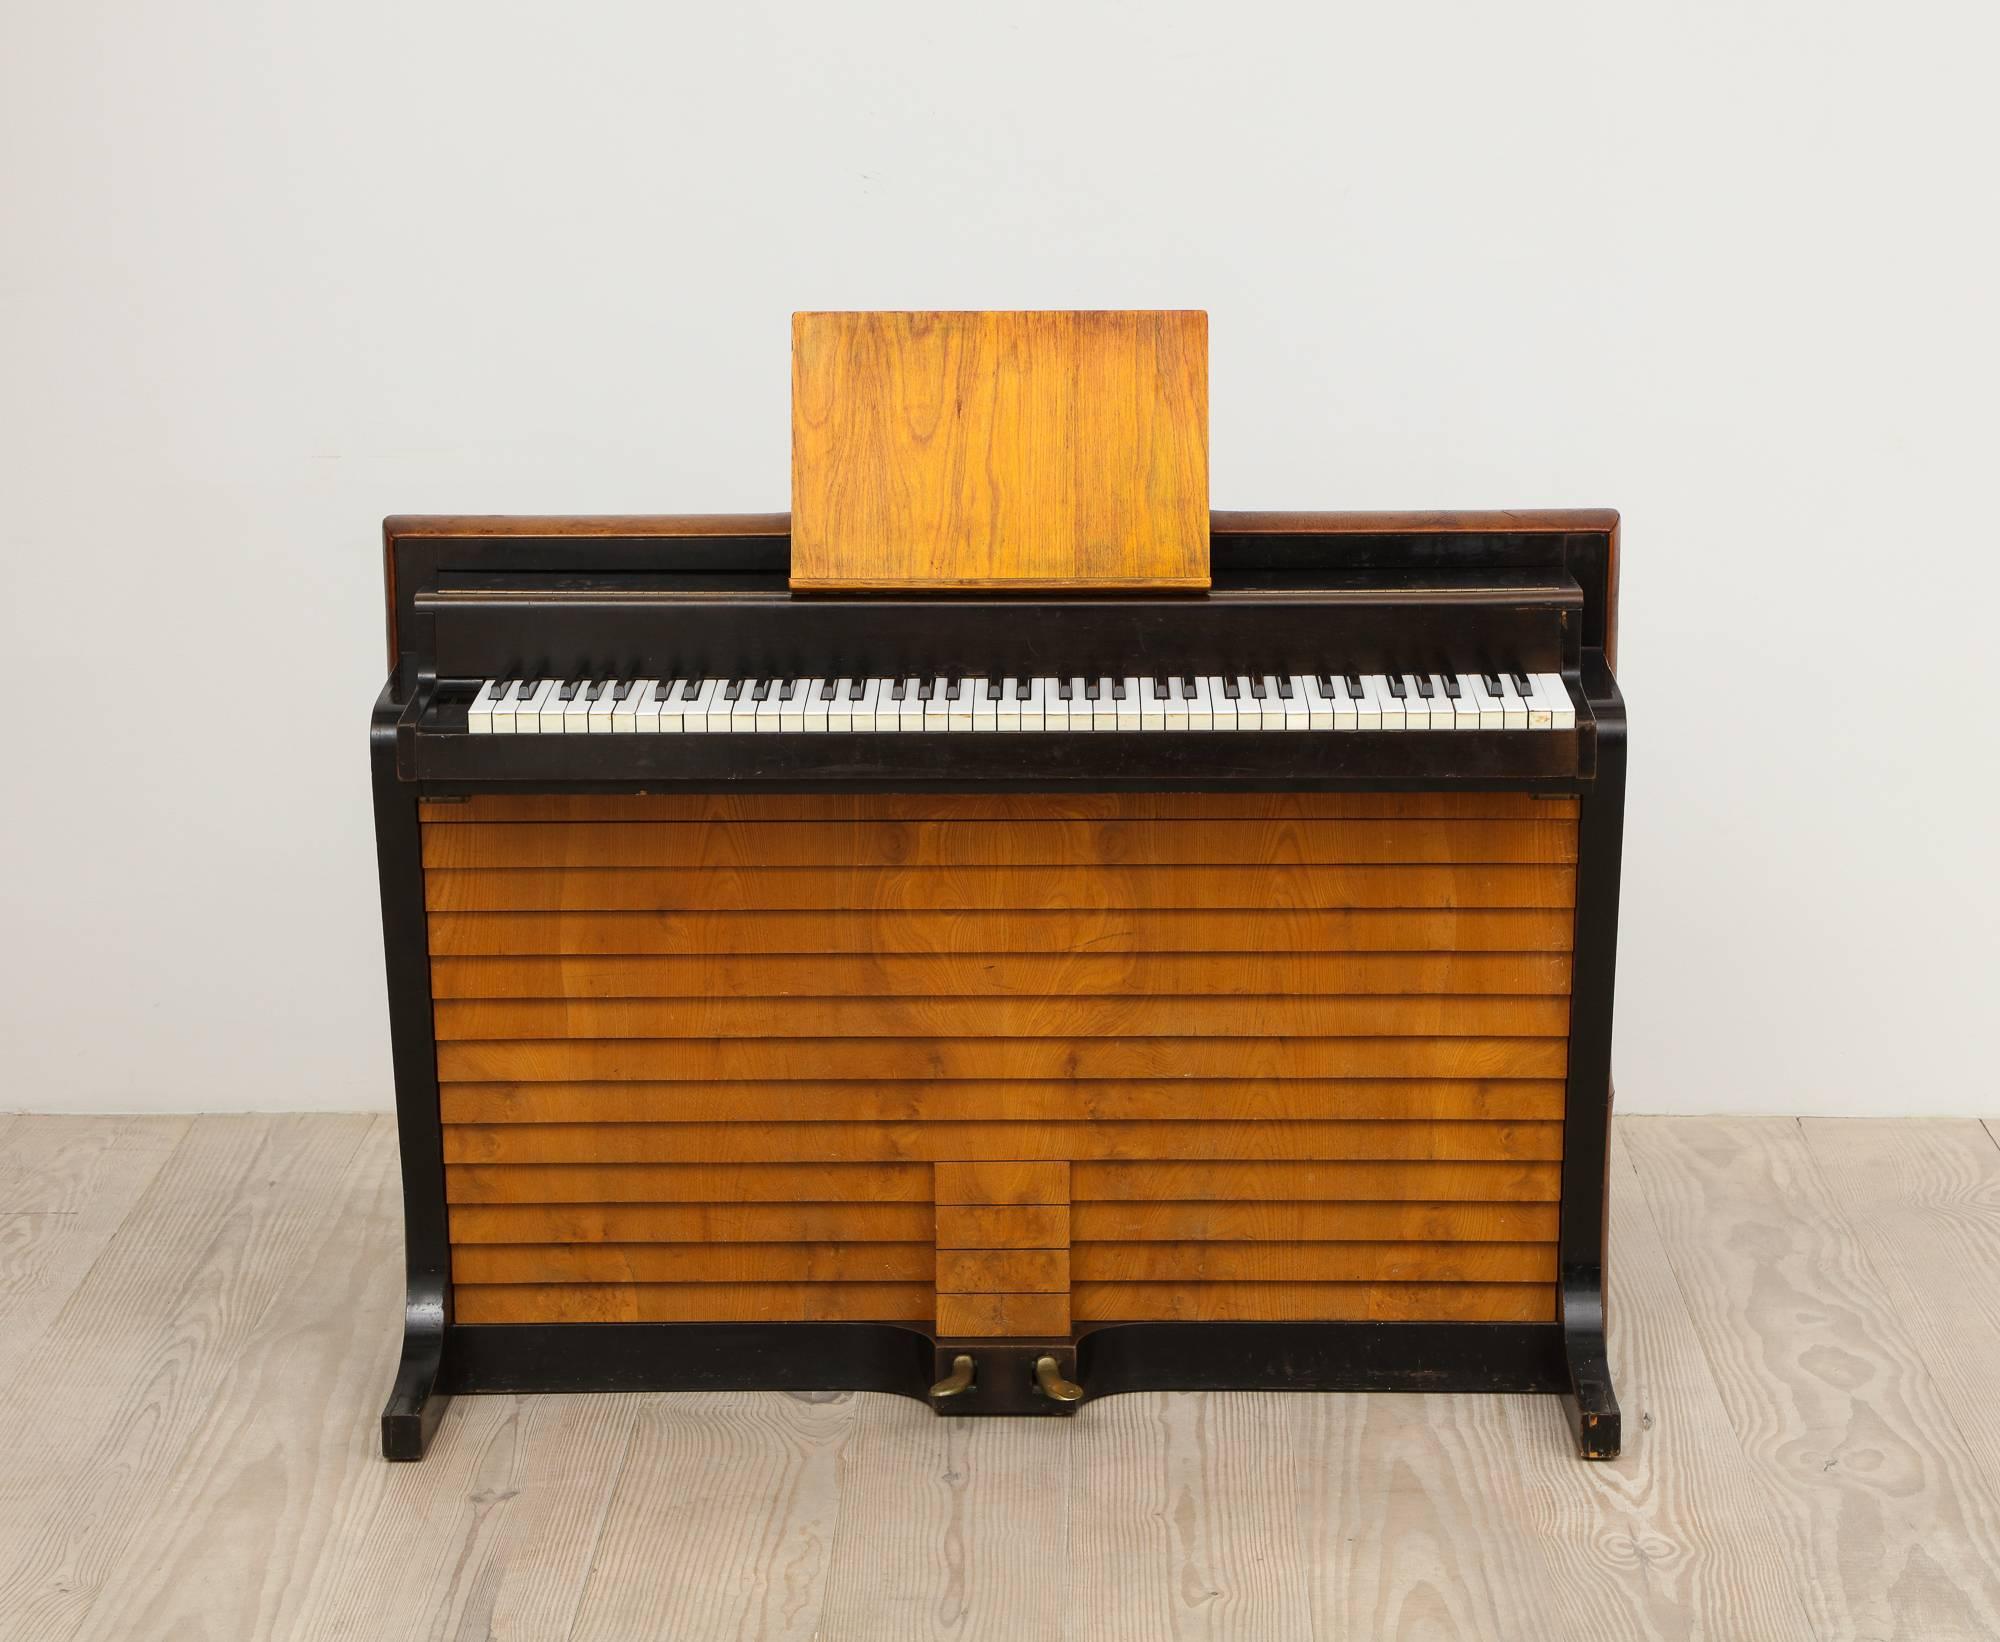 Poul Henningsen (Danish, Ordrup 1894-1967), upright piano - pianette, manufactured by Andreas Christensen, designed in 1935, origin: Copenhagen, Denmark, stained and ebonized woods with original patinated red Nigerian leather, stamped, left of